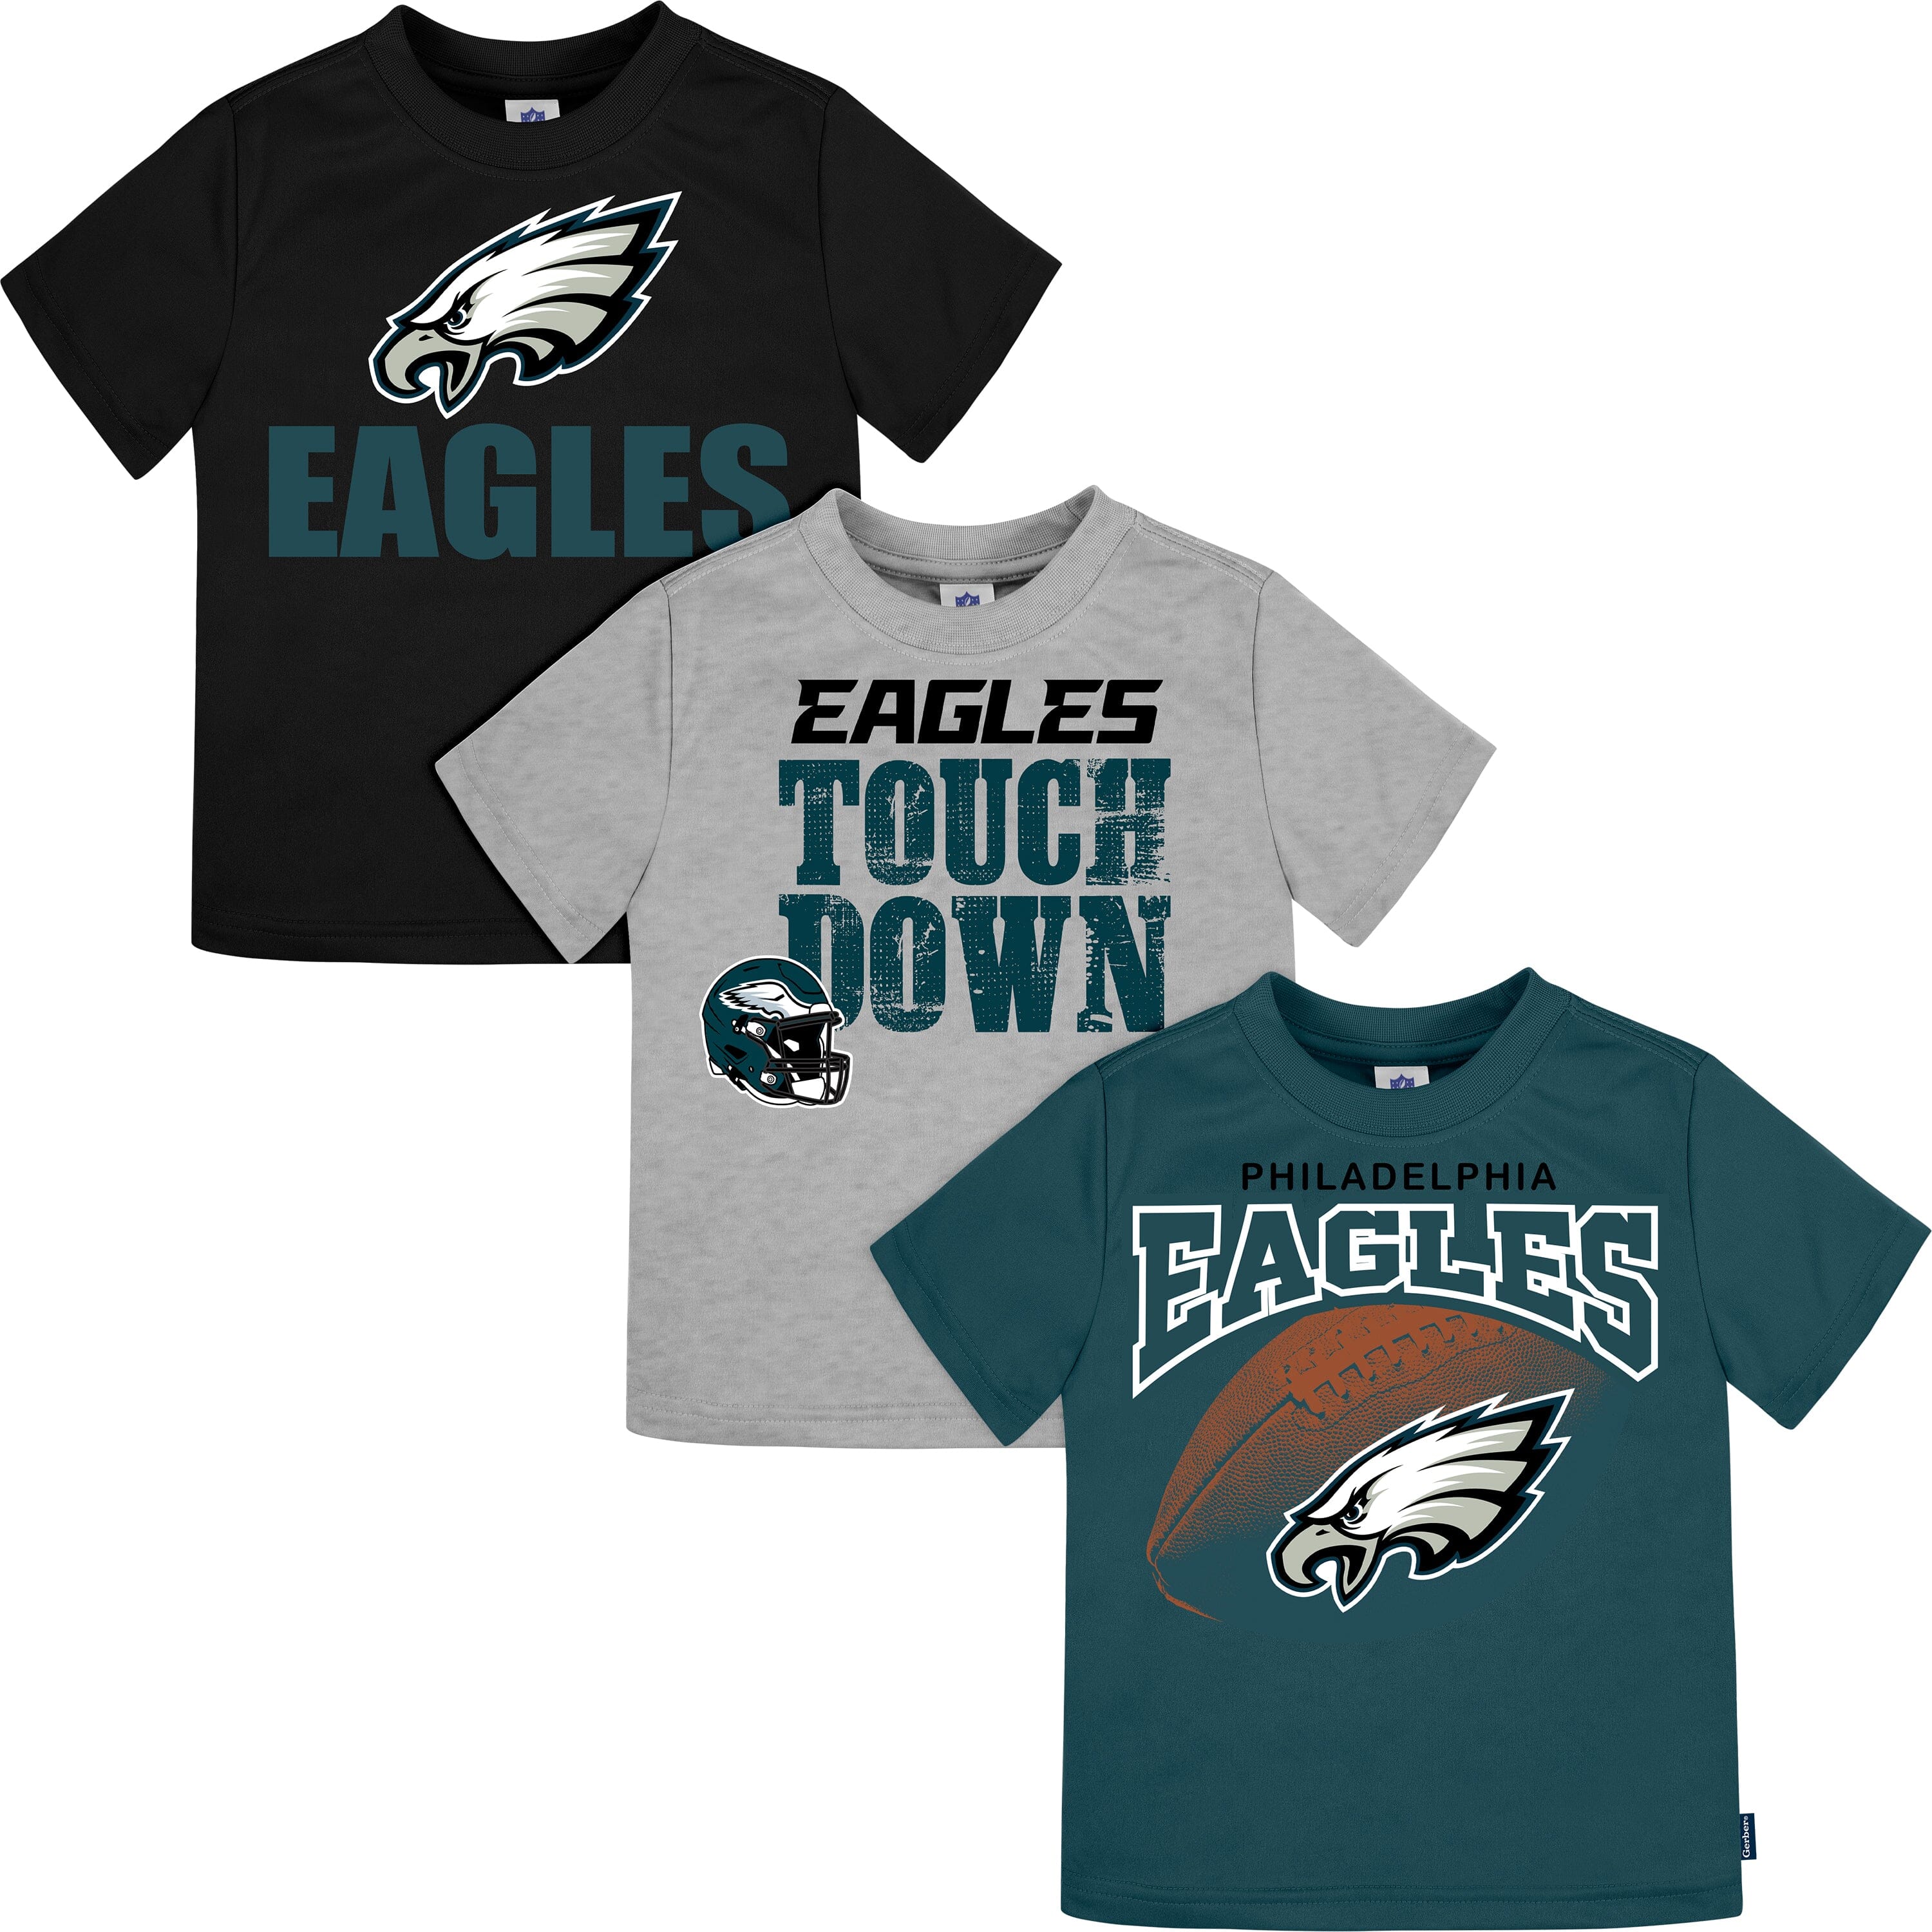 Philadelphia Eagles Women's Apparel, Eagles Ladies Jerseys, Gifts for her,  Clothing